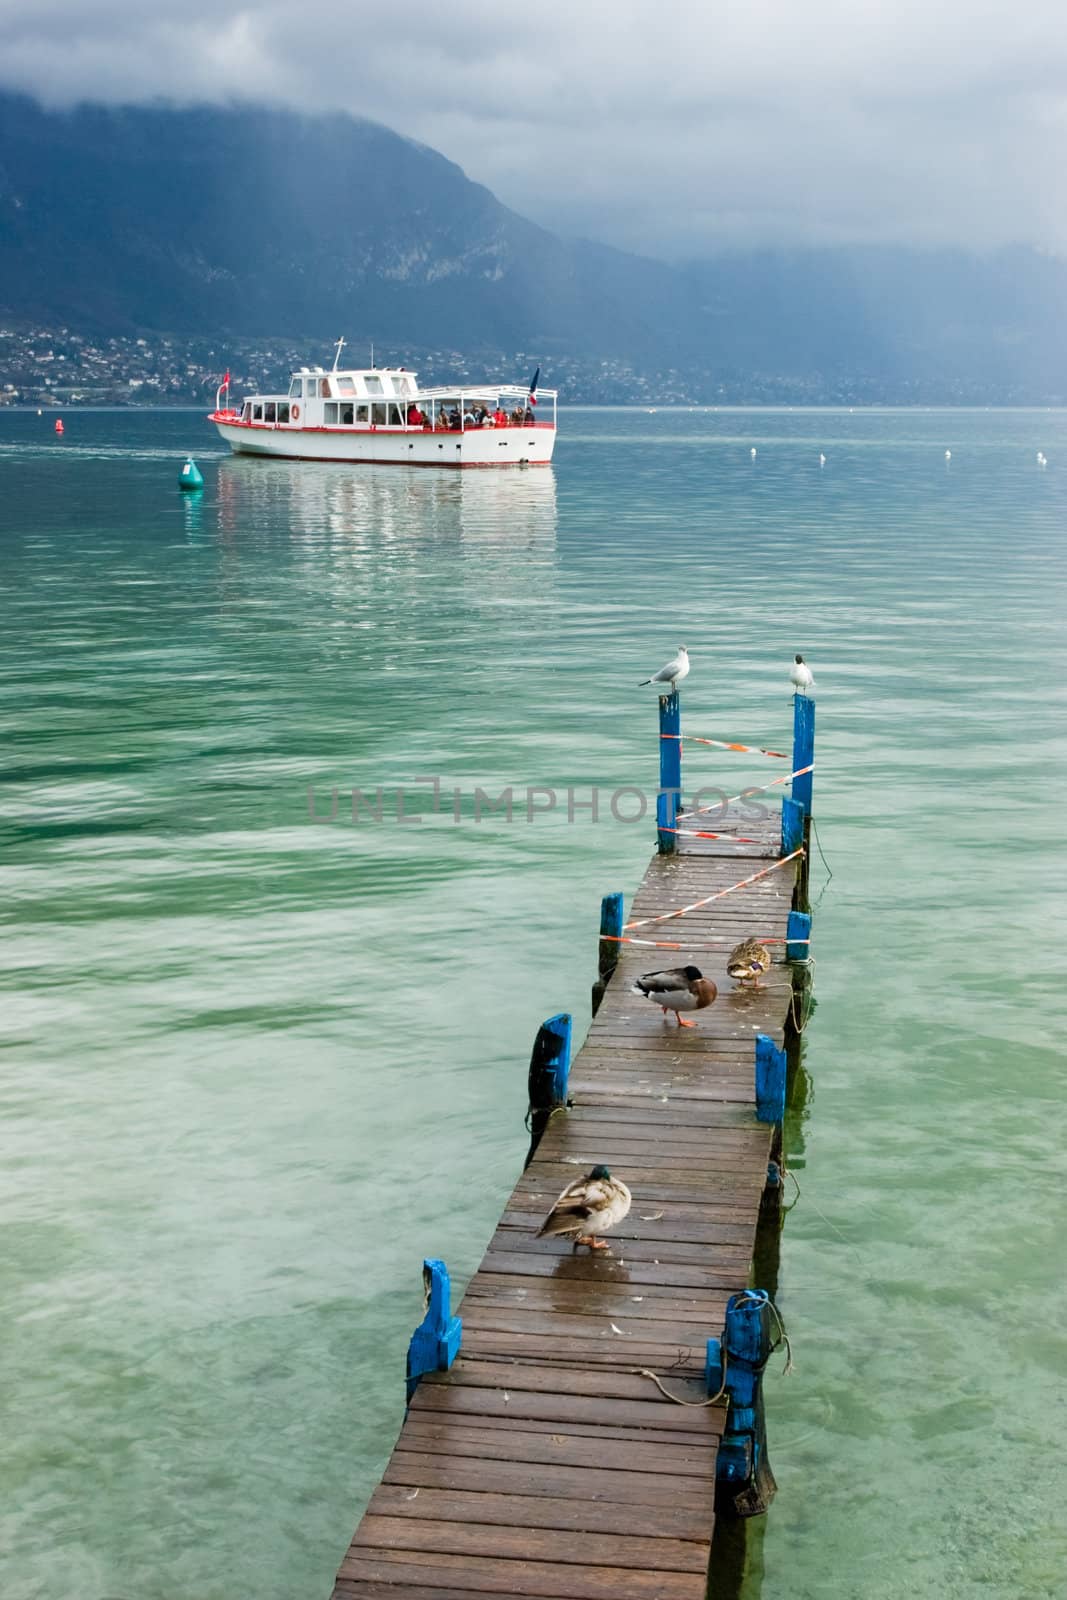 Lake Annecy by naumoid